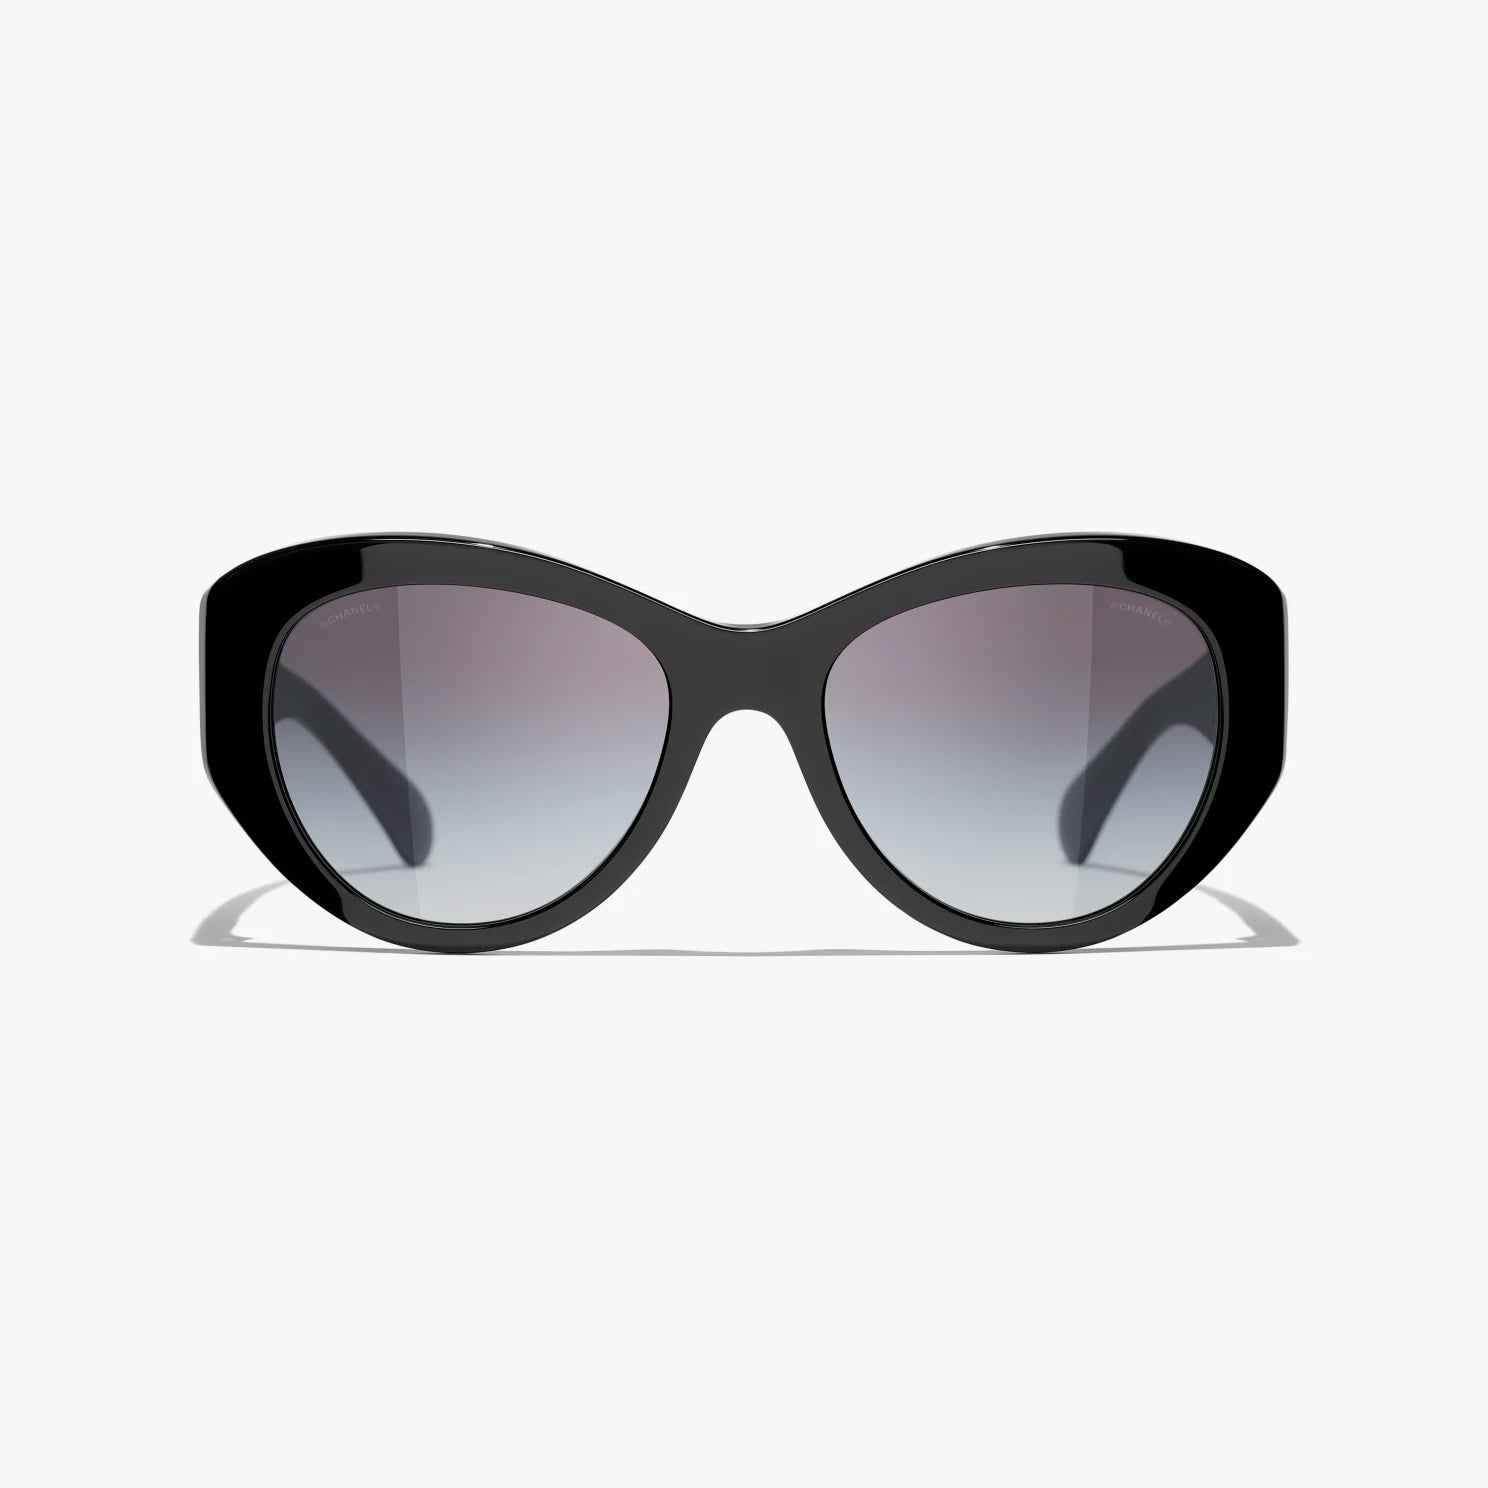 Chanel Butterfly Sunglasses